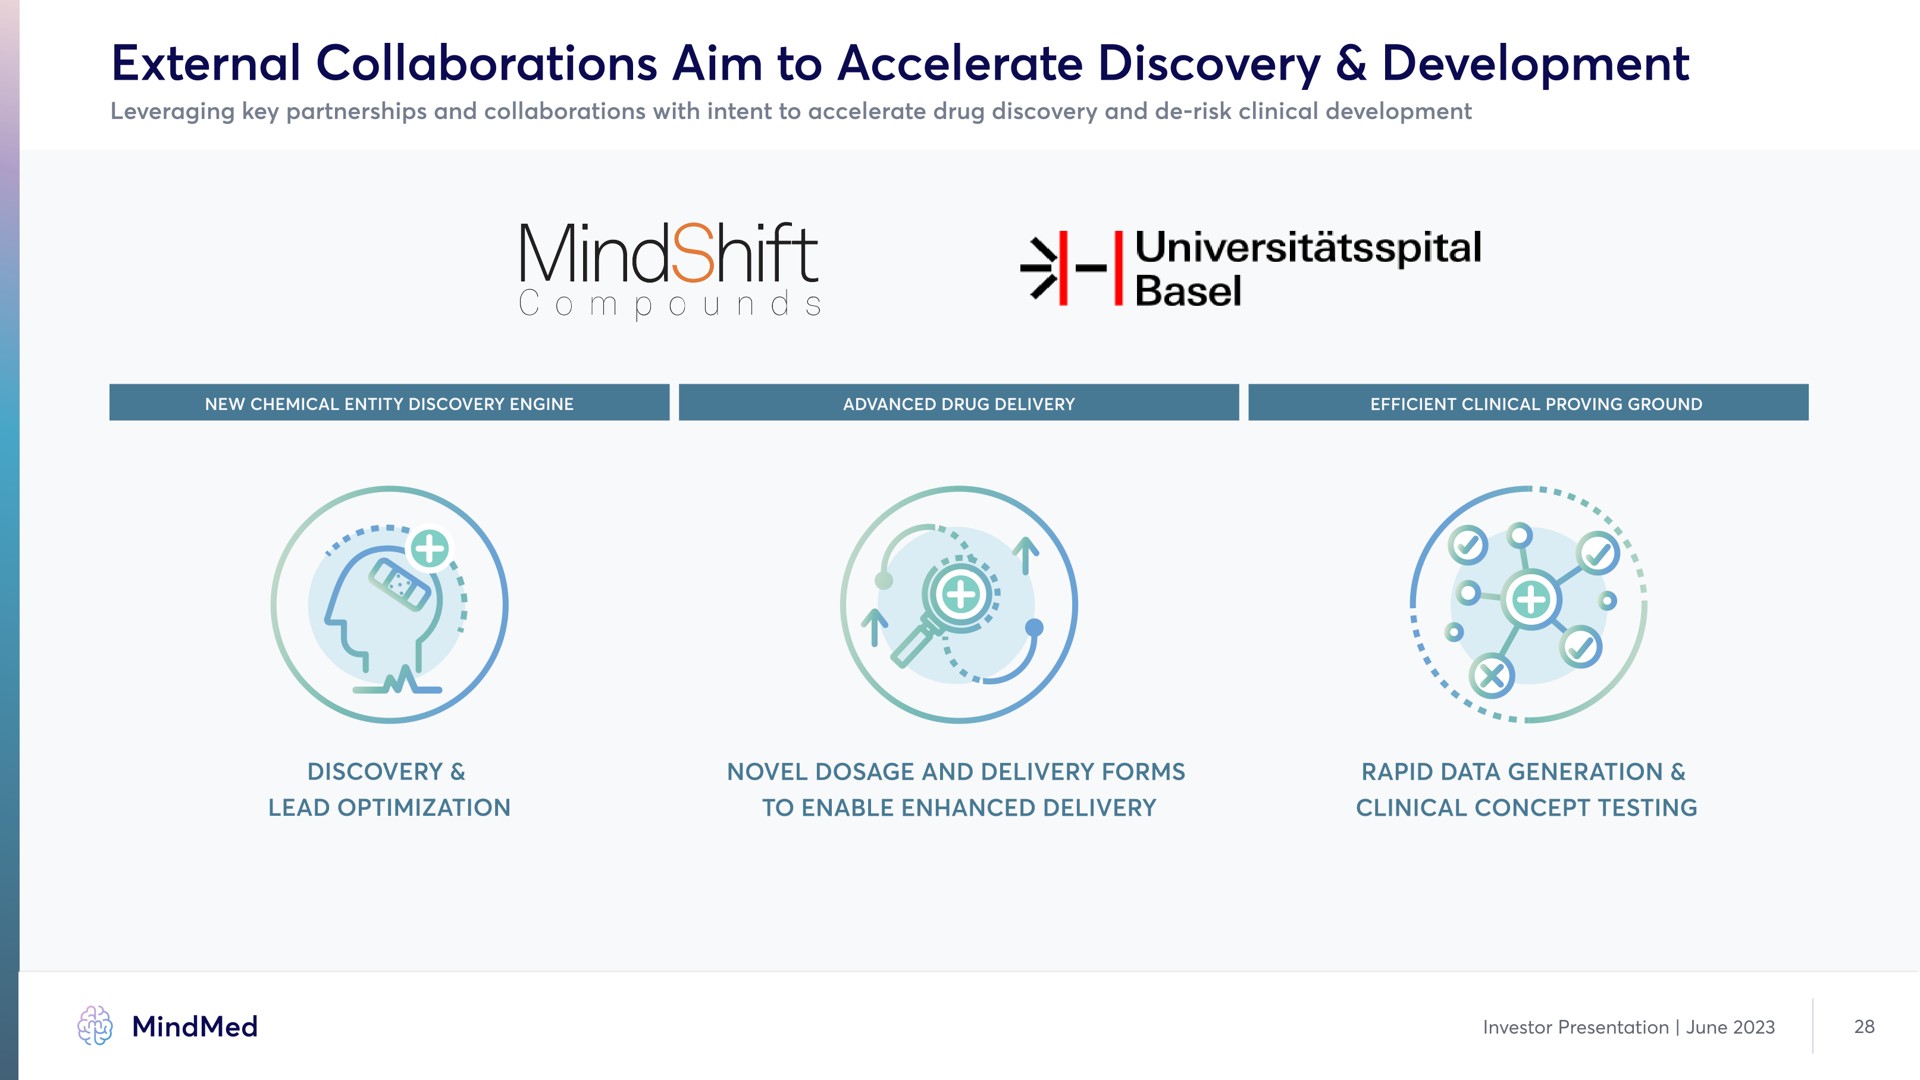 external collaborations aim to accelerate discovery development compounds | MindMed